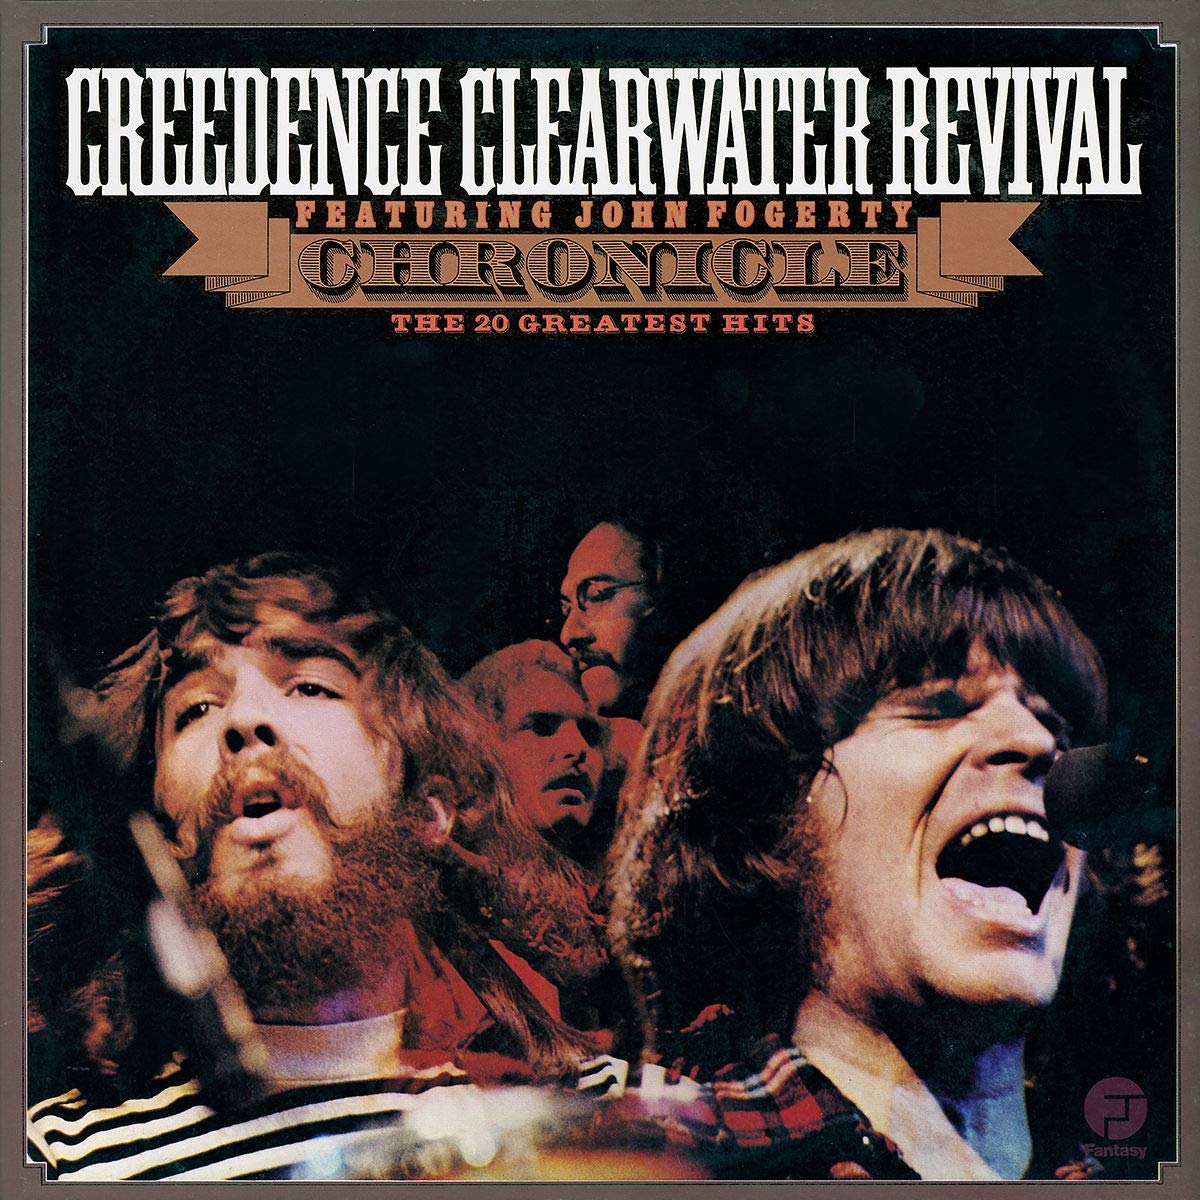 Creedence Clearwater Revival: Chronicle